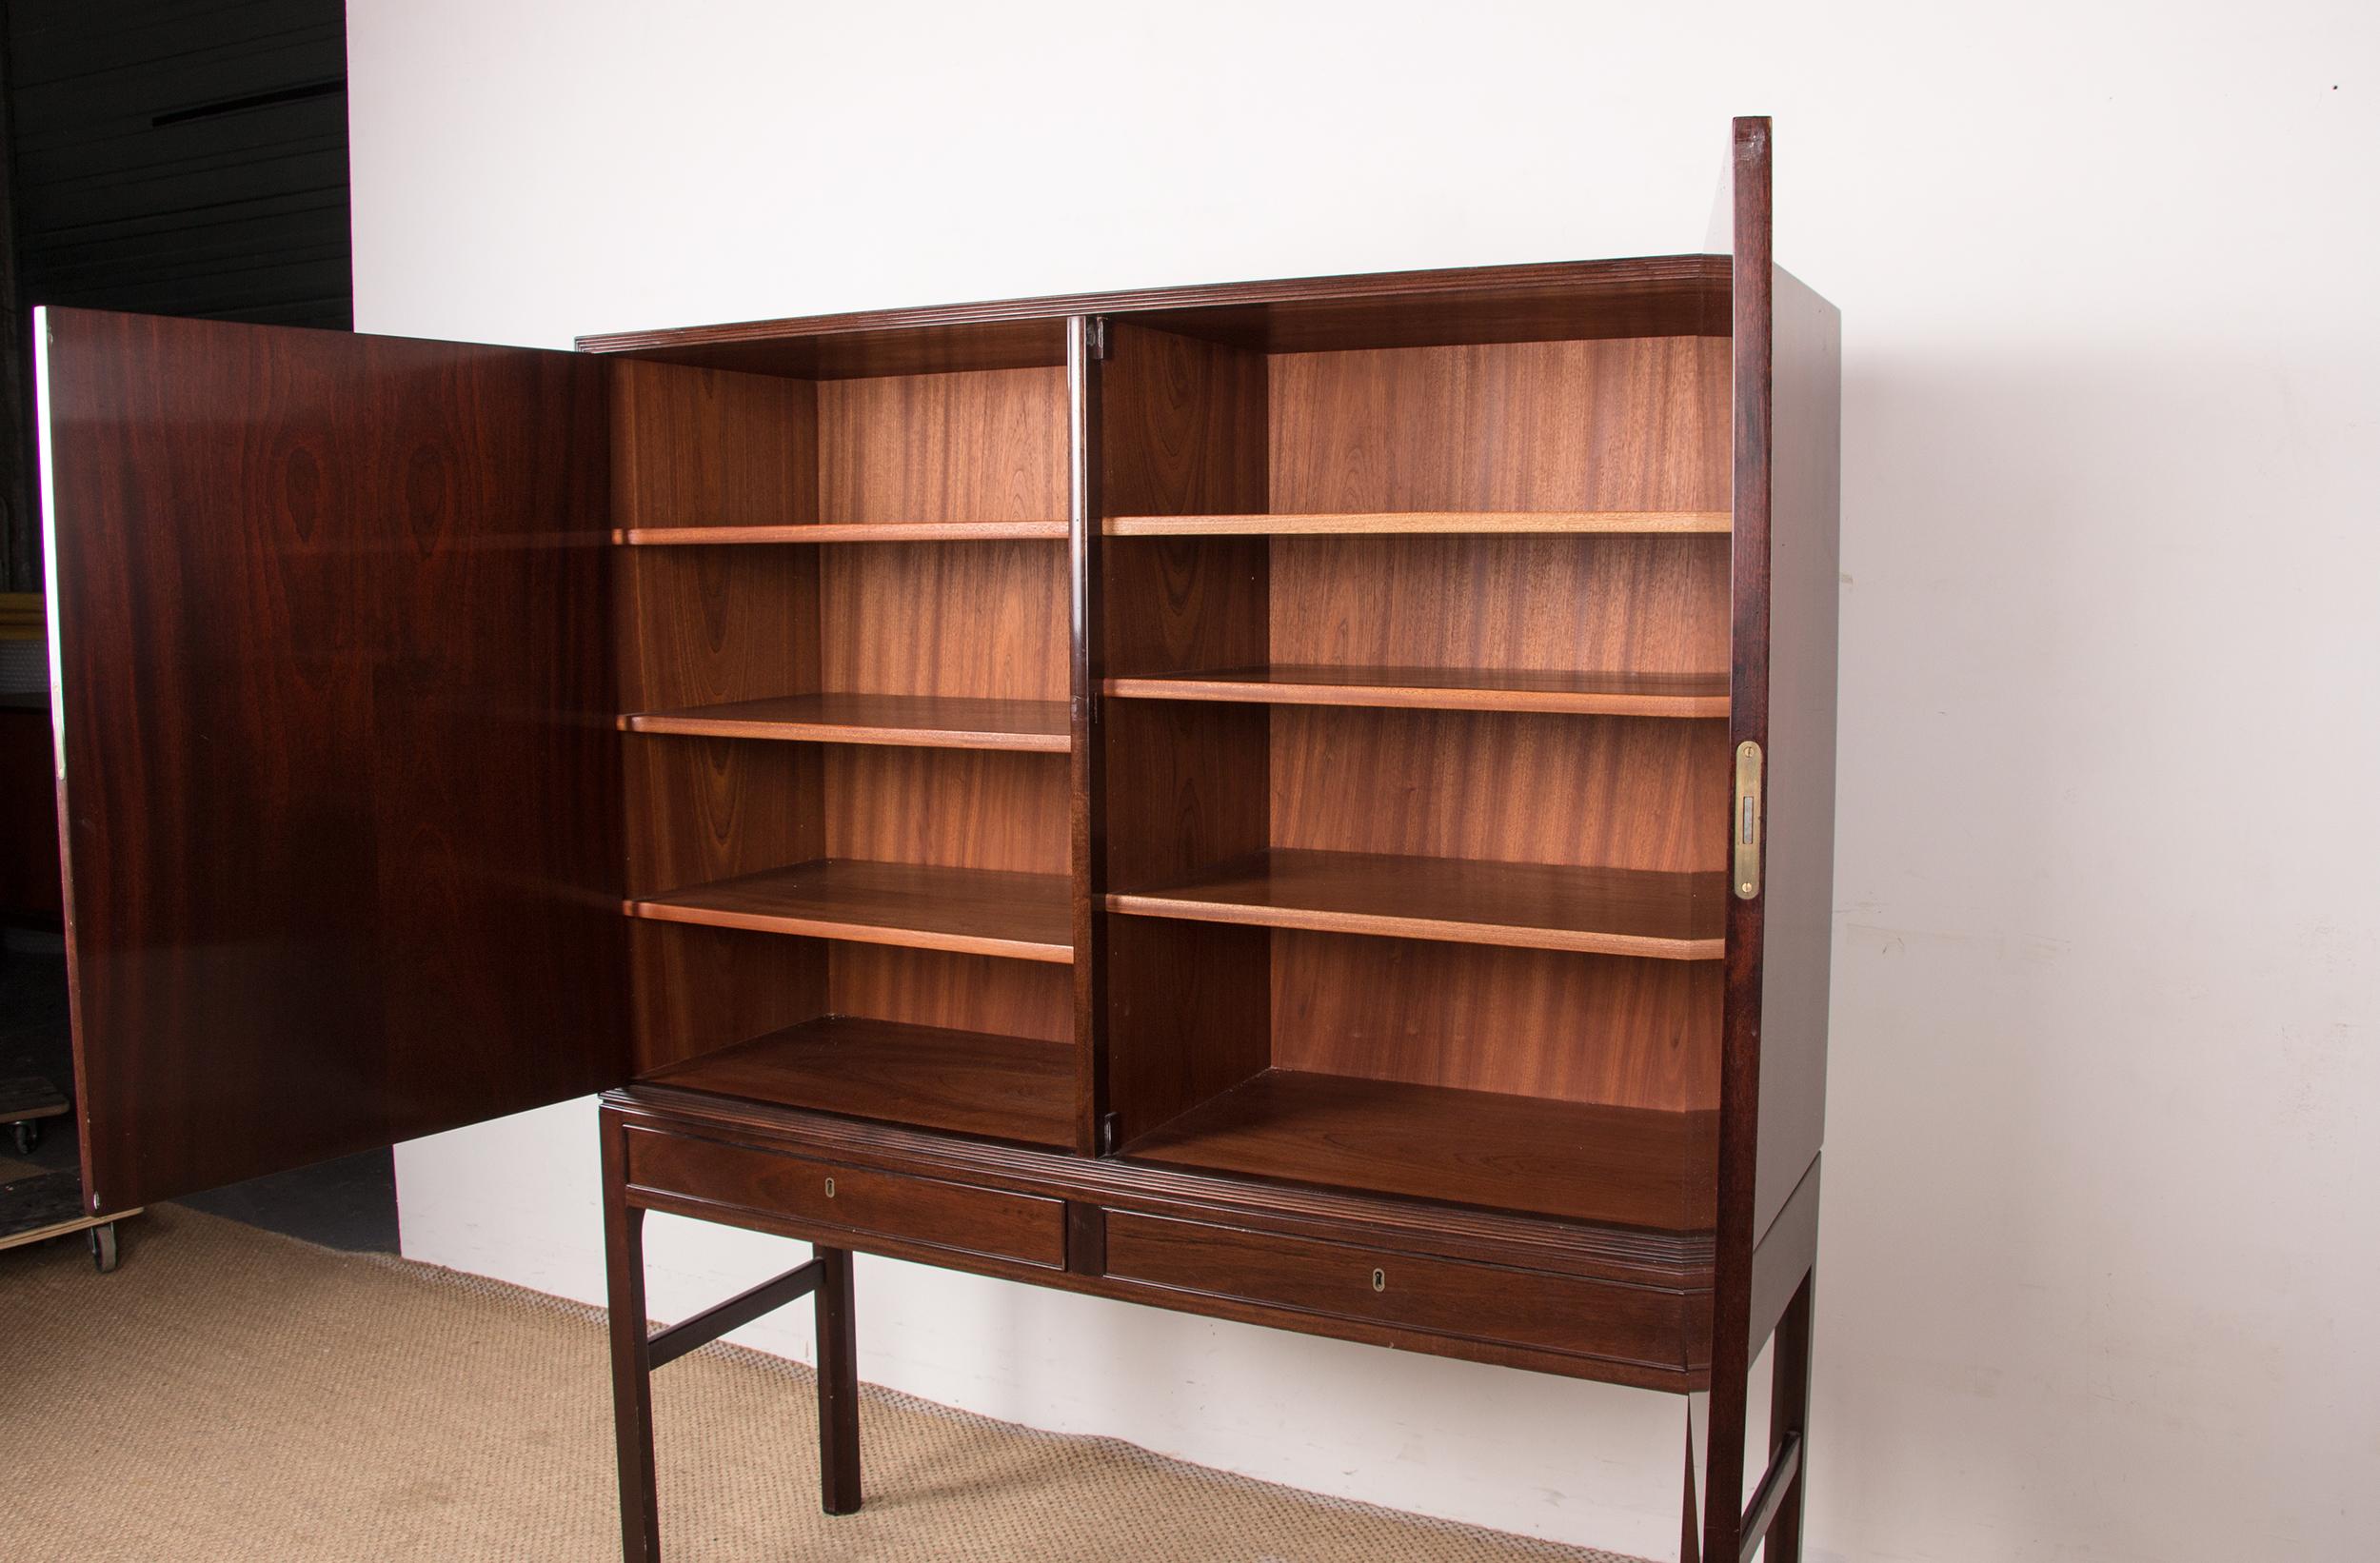 High Danish Cabinet in Mahogany and Brass by Ole Wanscher for Poul Jeppesen 1960 For Sale 2